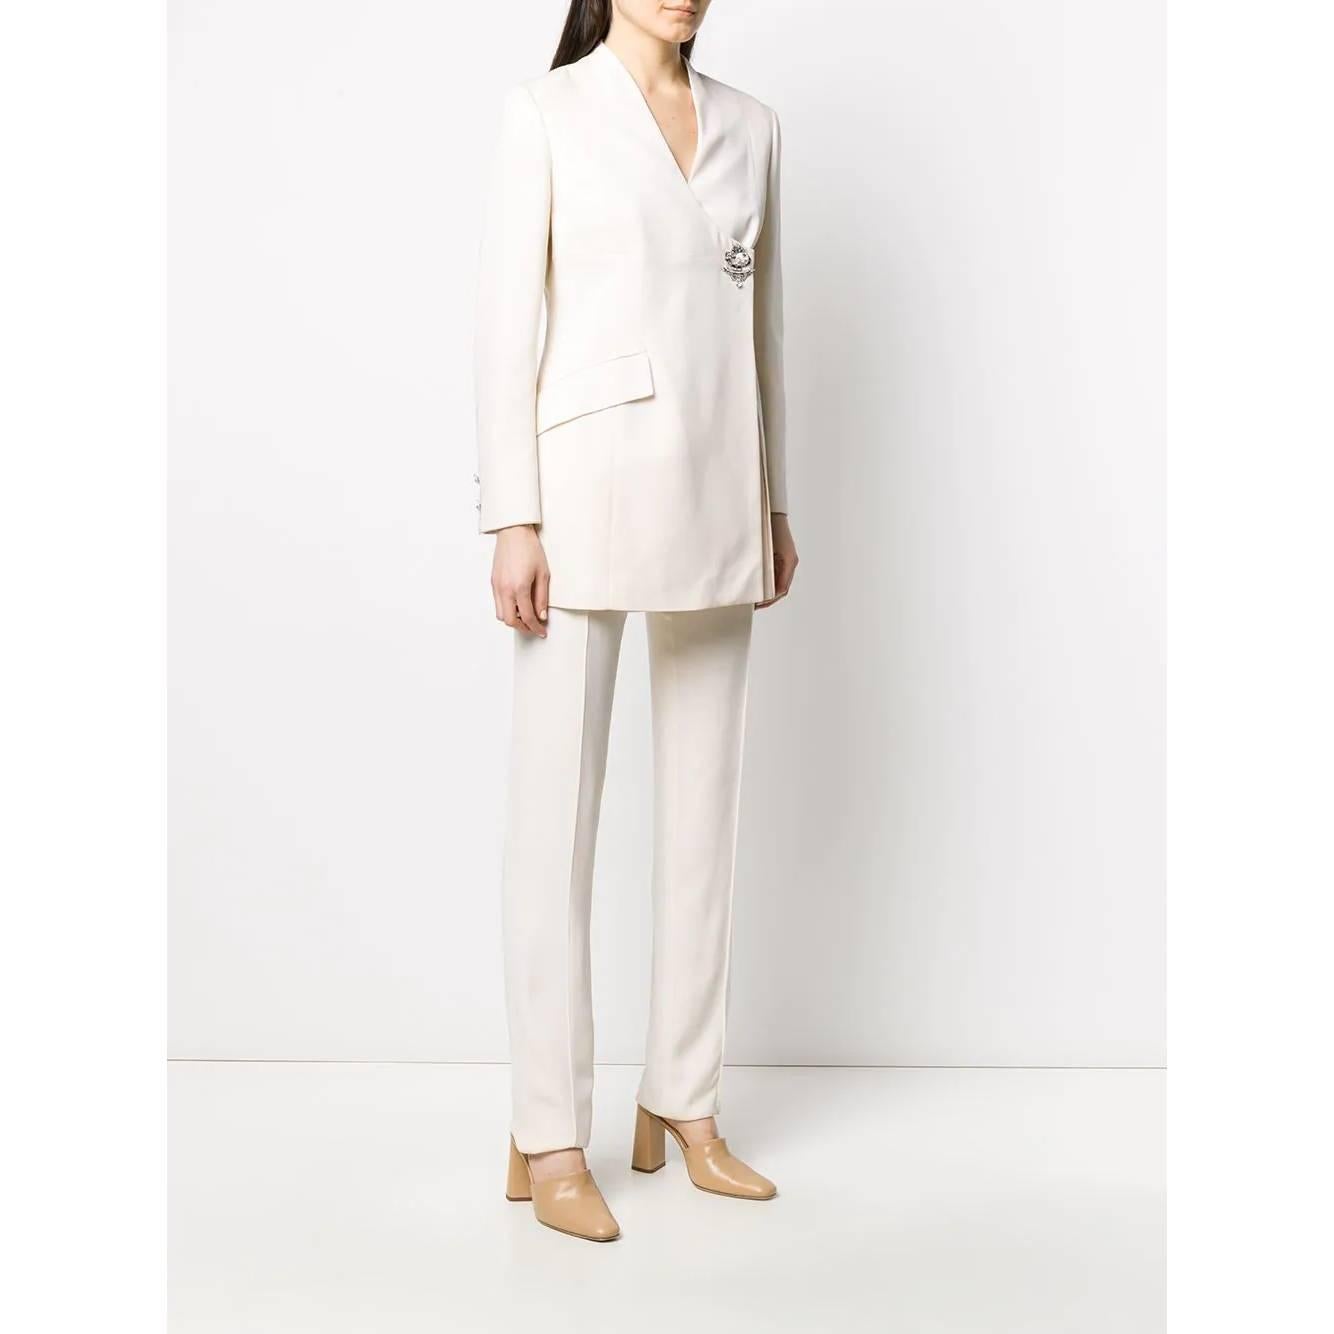 A.N.G.E.L.O. Vintage - Italy
Gianfranco Ferré ivory silk trousers suit. V-neck jacket with off-center closure with jewel button and decorative applications. Straight high-waisted trousers, front seam, welt pockets and side zip and button